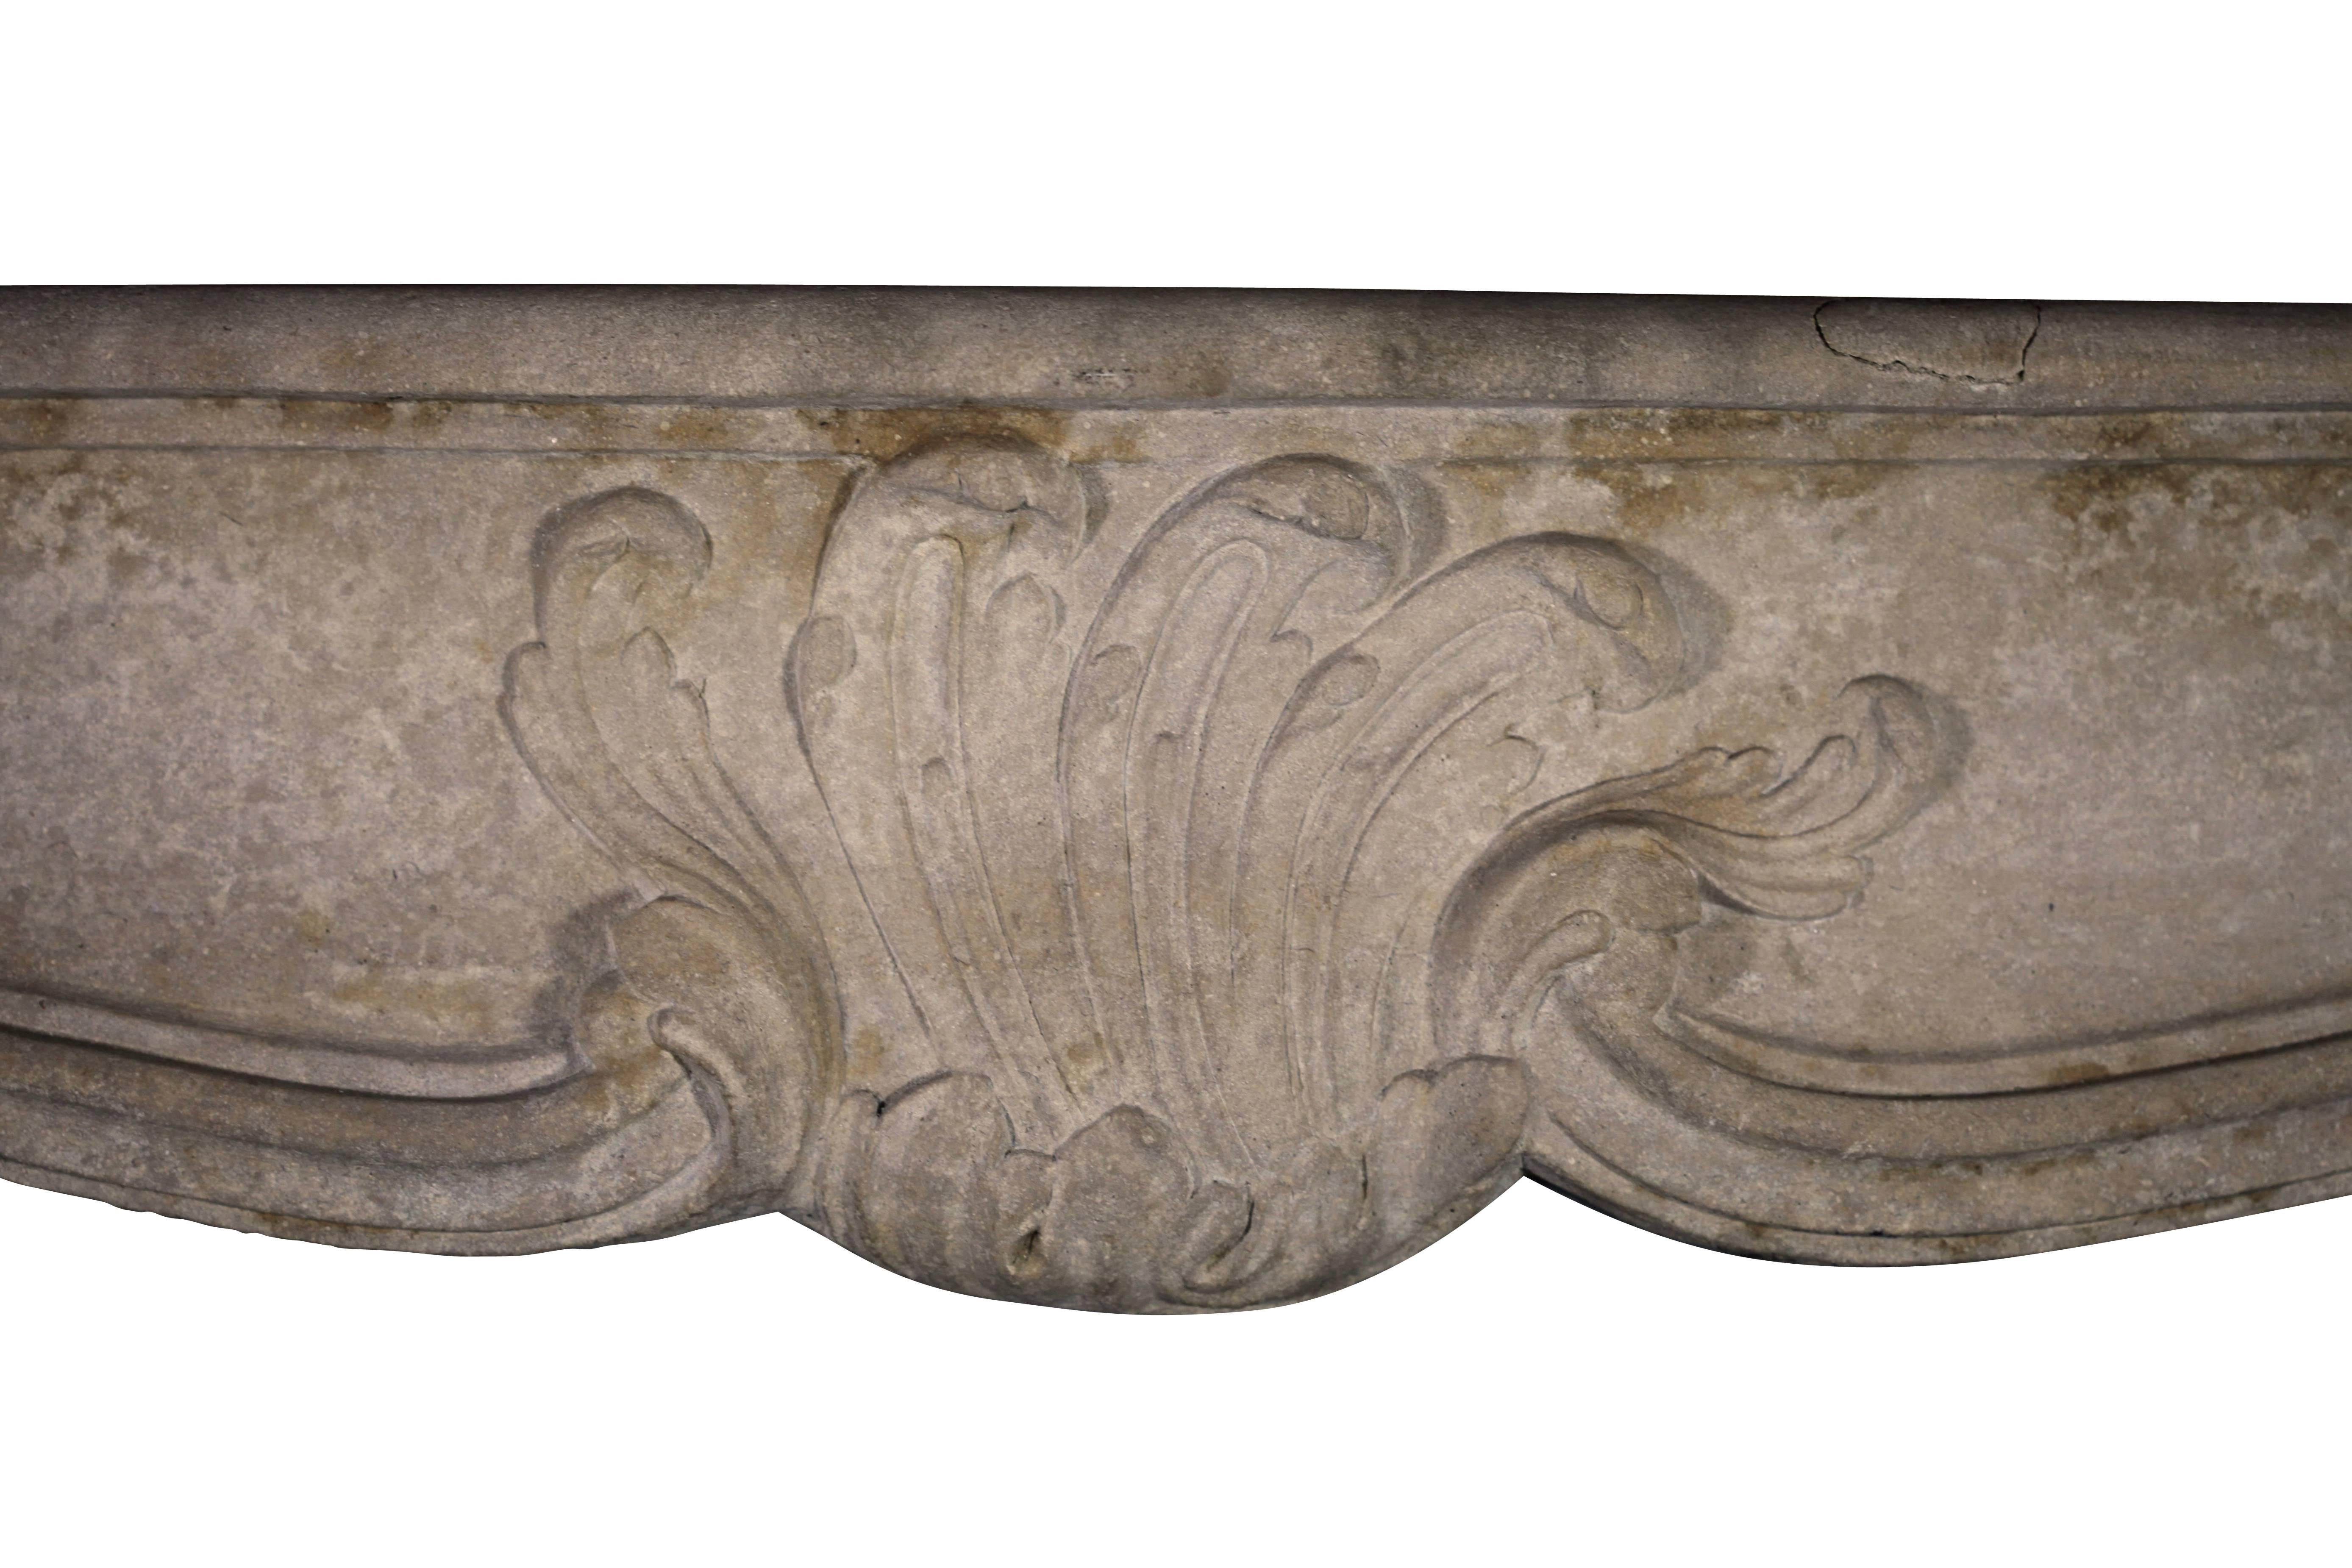 A fine antique fireplace surround in limestone from the Vosges region with decorative flower motive carving from the Regency period. The mantel has a nice patina and the French look to create a cosy room with style.
Measures:
166 cm EW